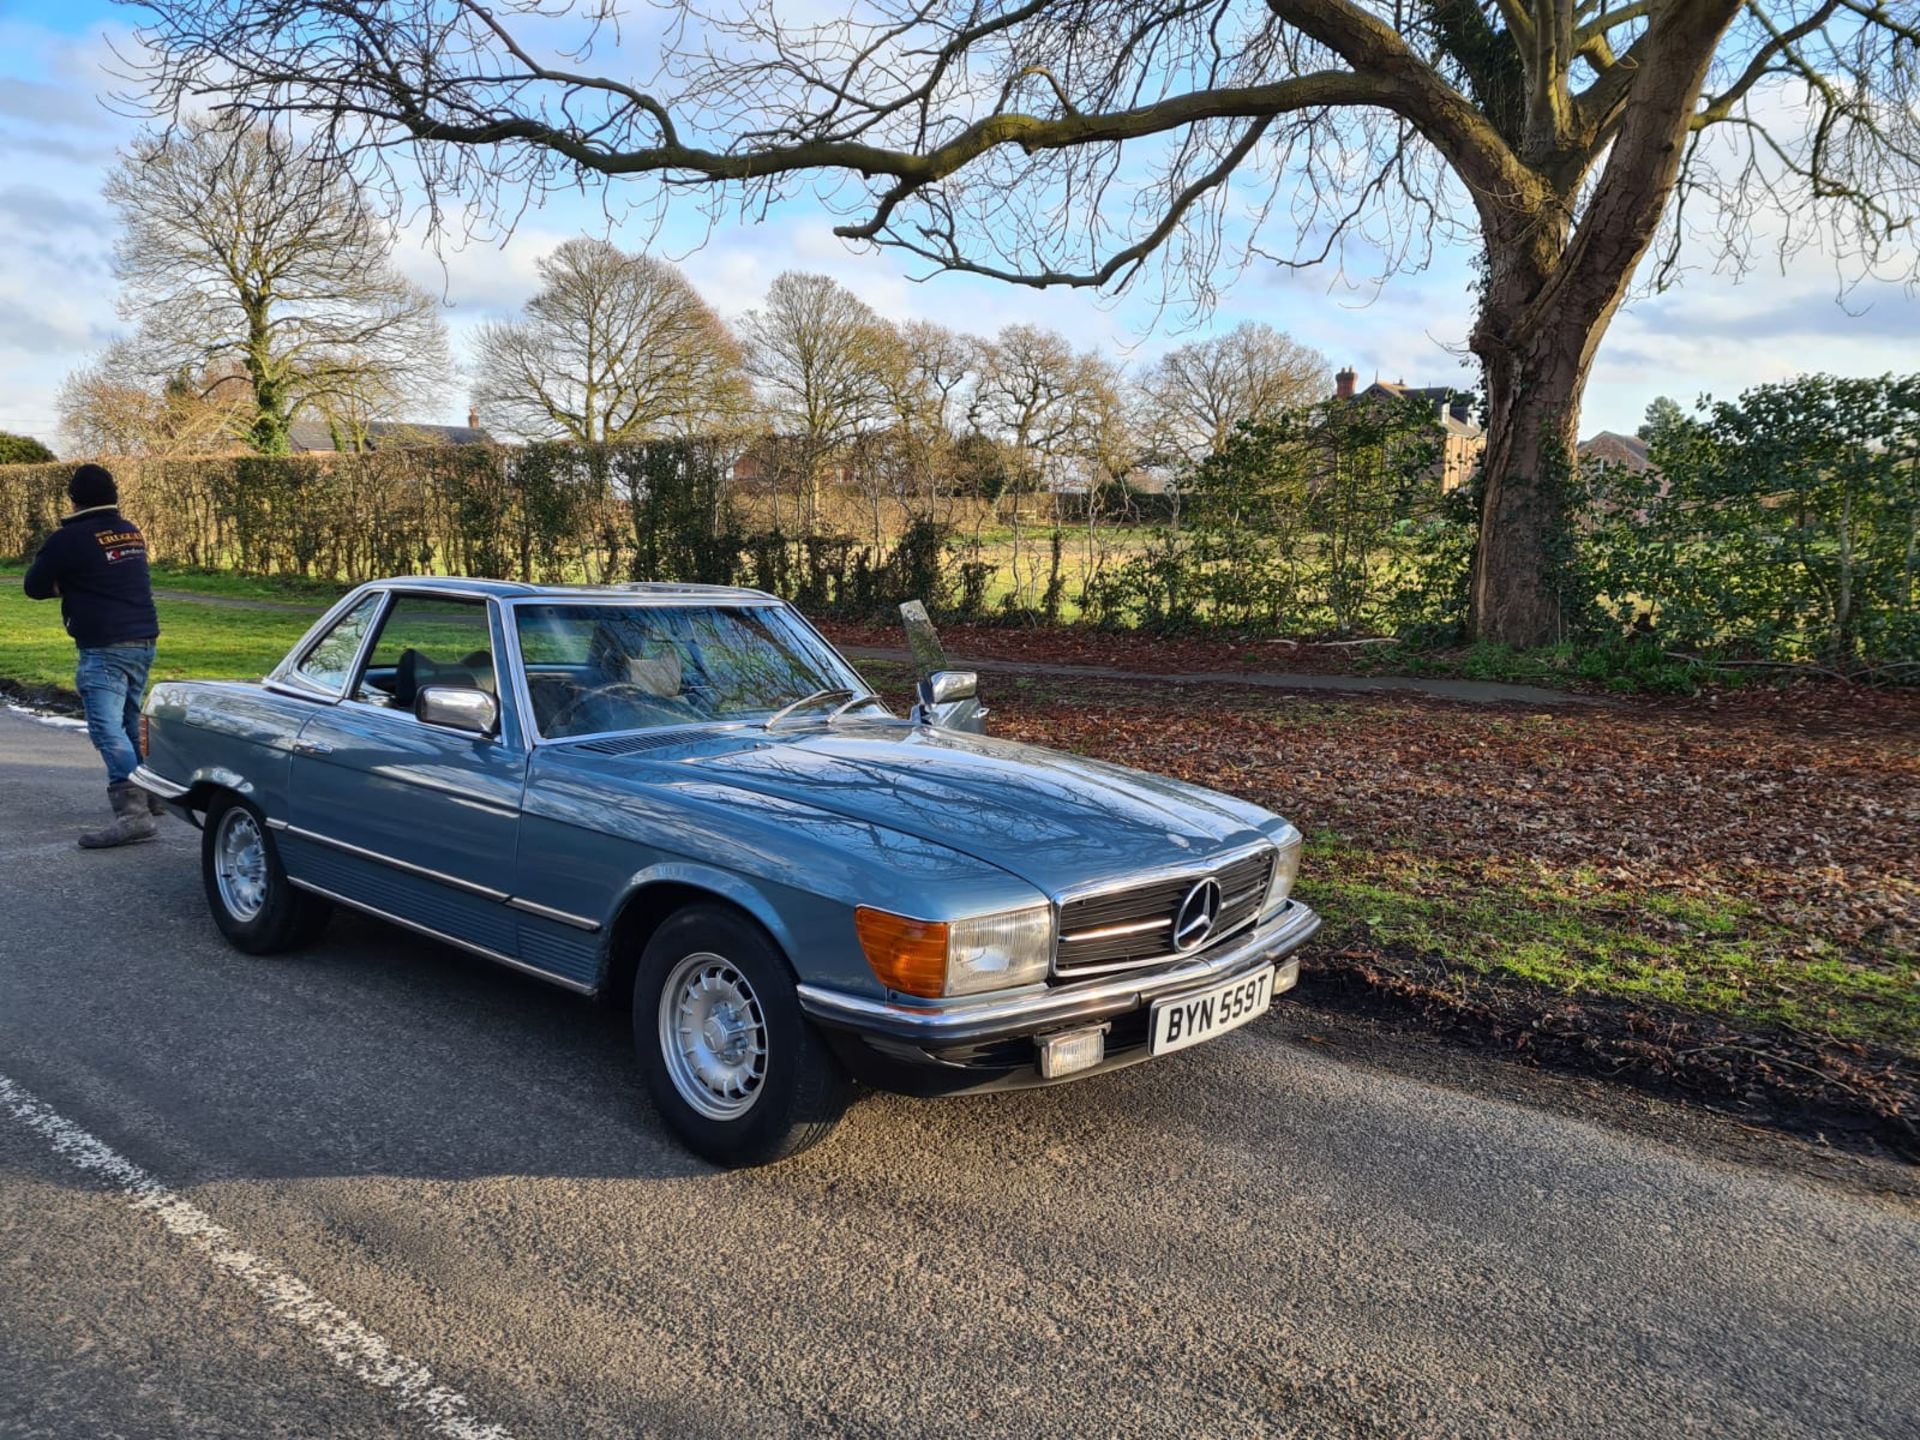 Stunning 1979 Mercedes Benz SL350 V8 With Factory Hardtop - Restored in 2018 - Image 3 of 22